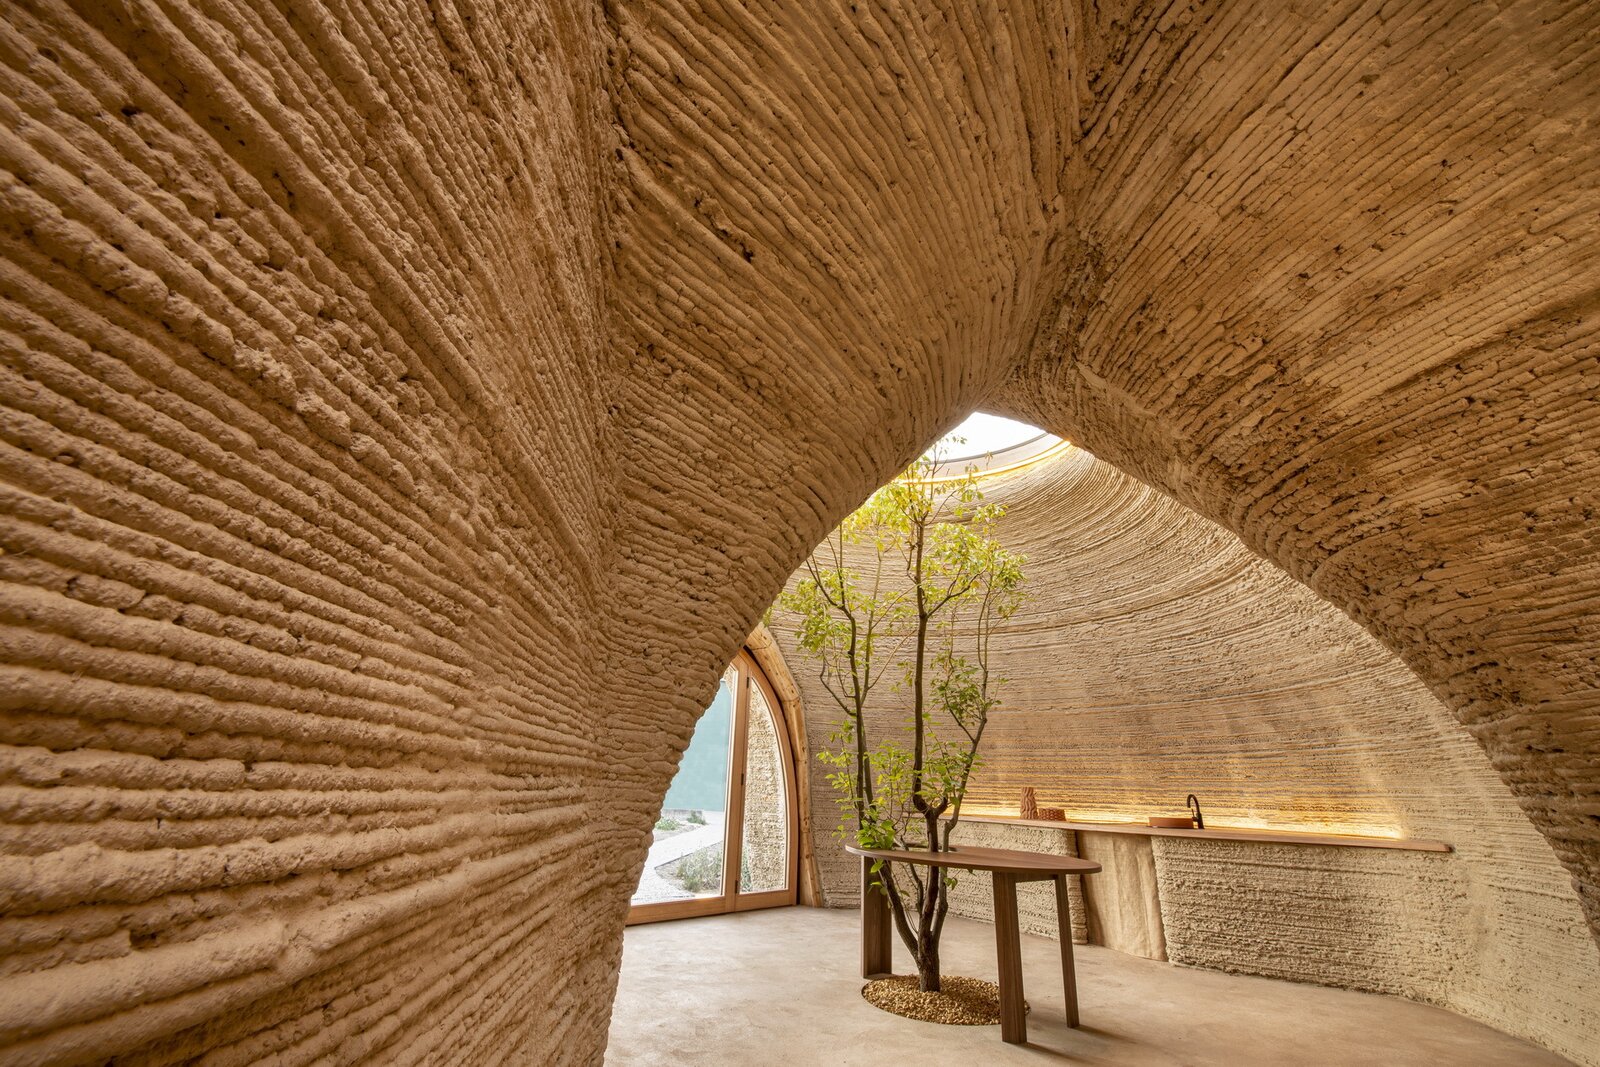 TECLA 3D-Printed Home by Mario Cucinella Architects and WASP